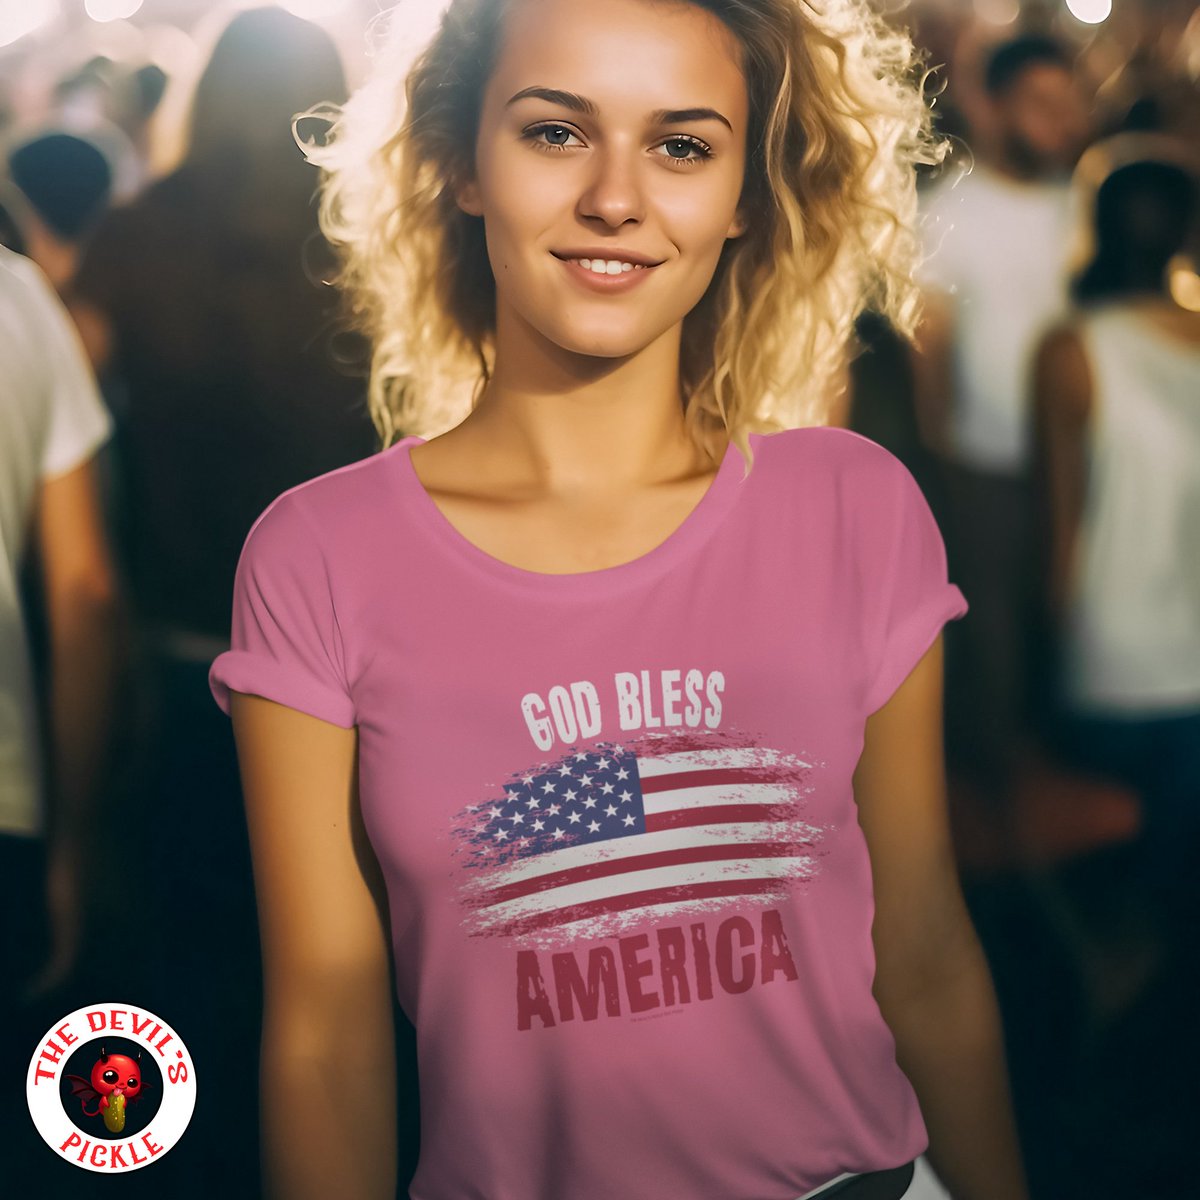 Rocking the Stars and Stripes in this God Bless America T-Shirt - let freedom ring! 🌟🔔 The Best Patriotic Tees, Hoodies, Sweatshirts and More!

#offensivetshirts #USA #hellyeahamerica #UnitedStates #Freedom #ProudAmerican #byob #americanpride #patriot #merica #GodBlessAmerica